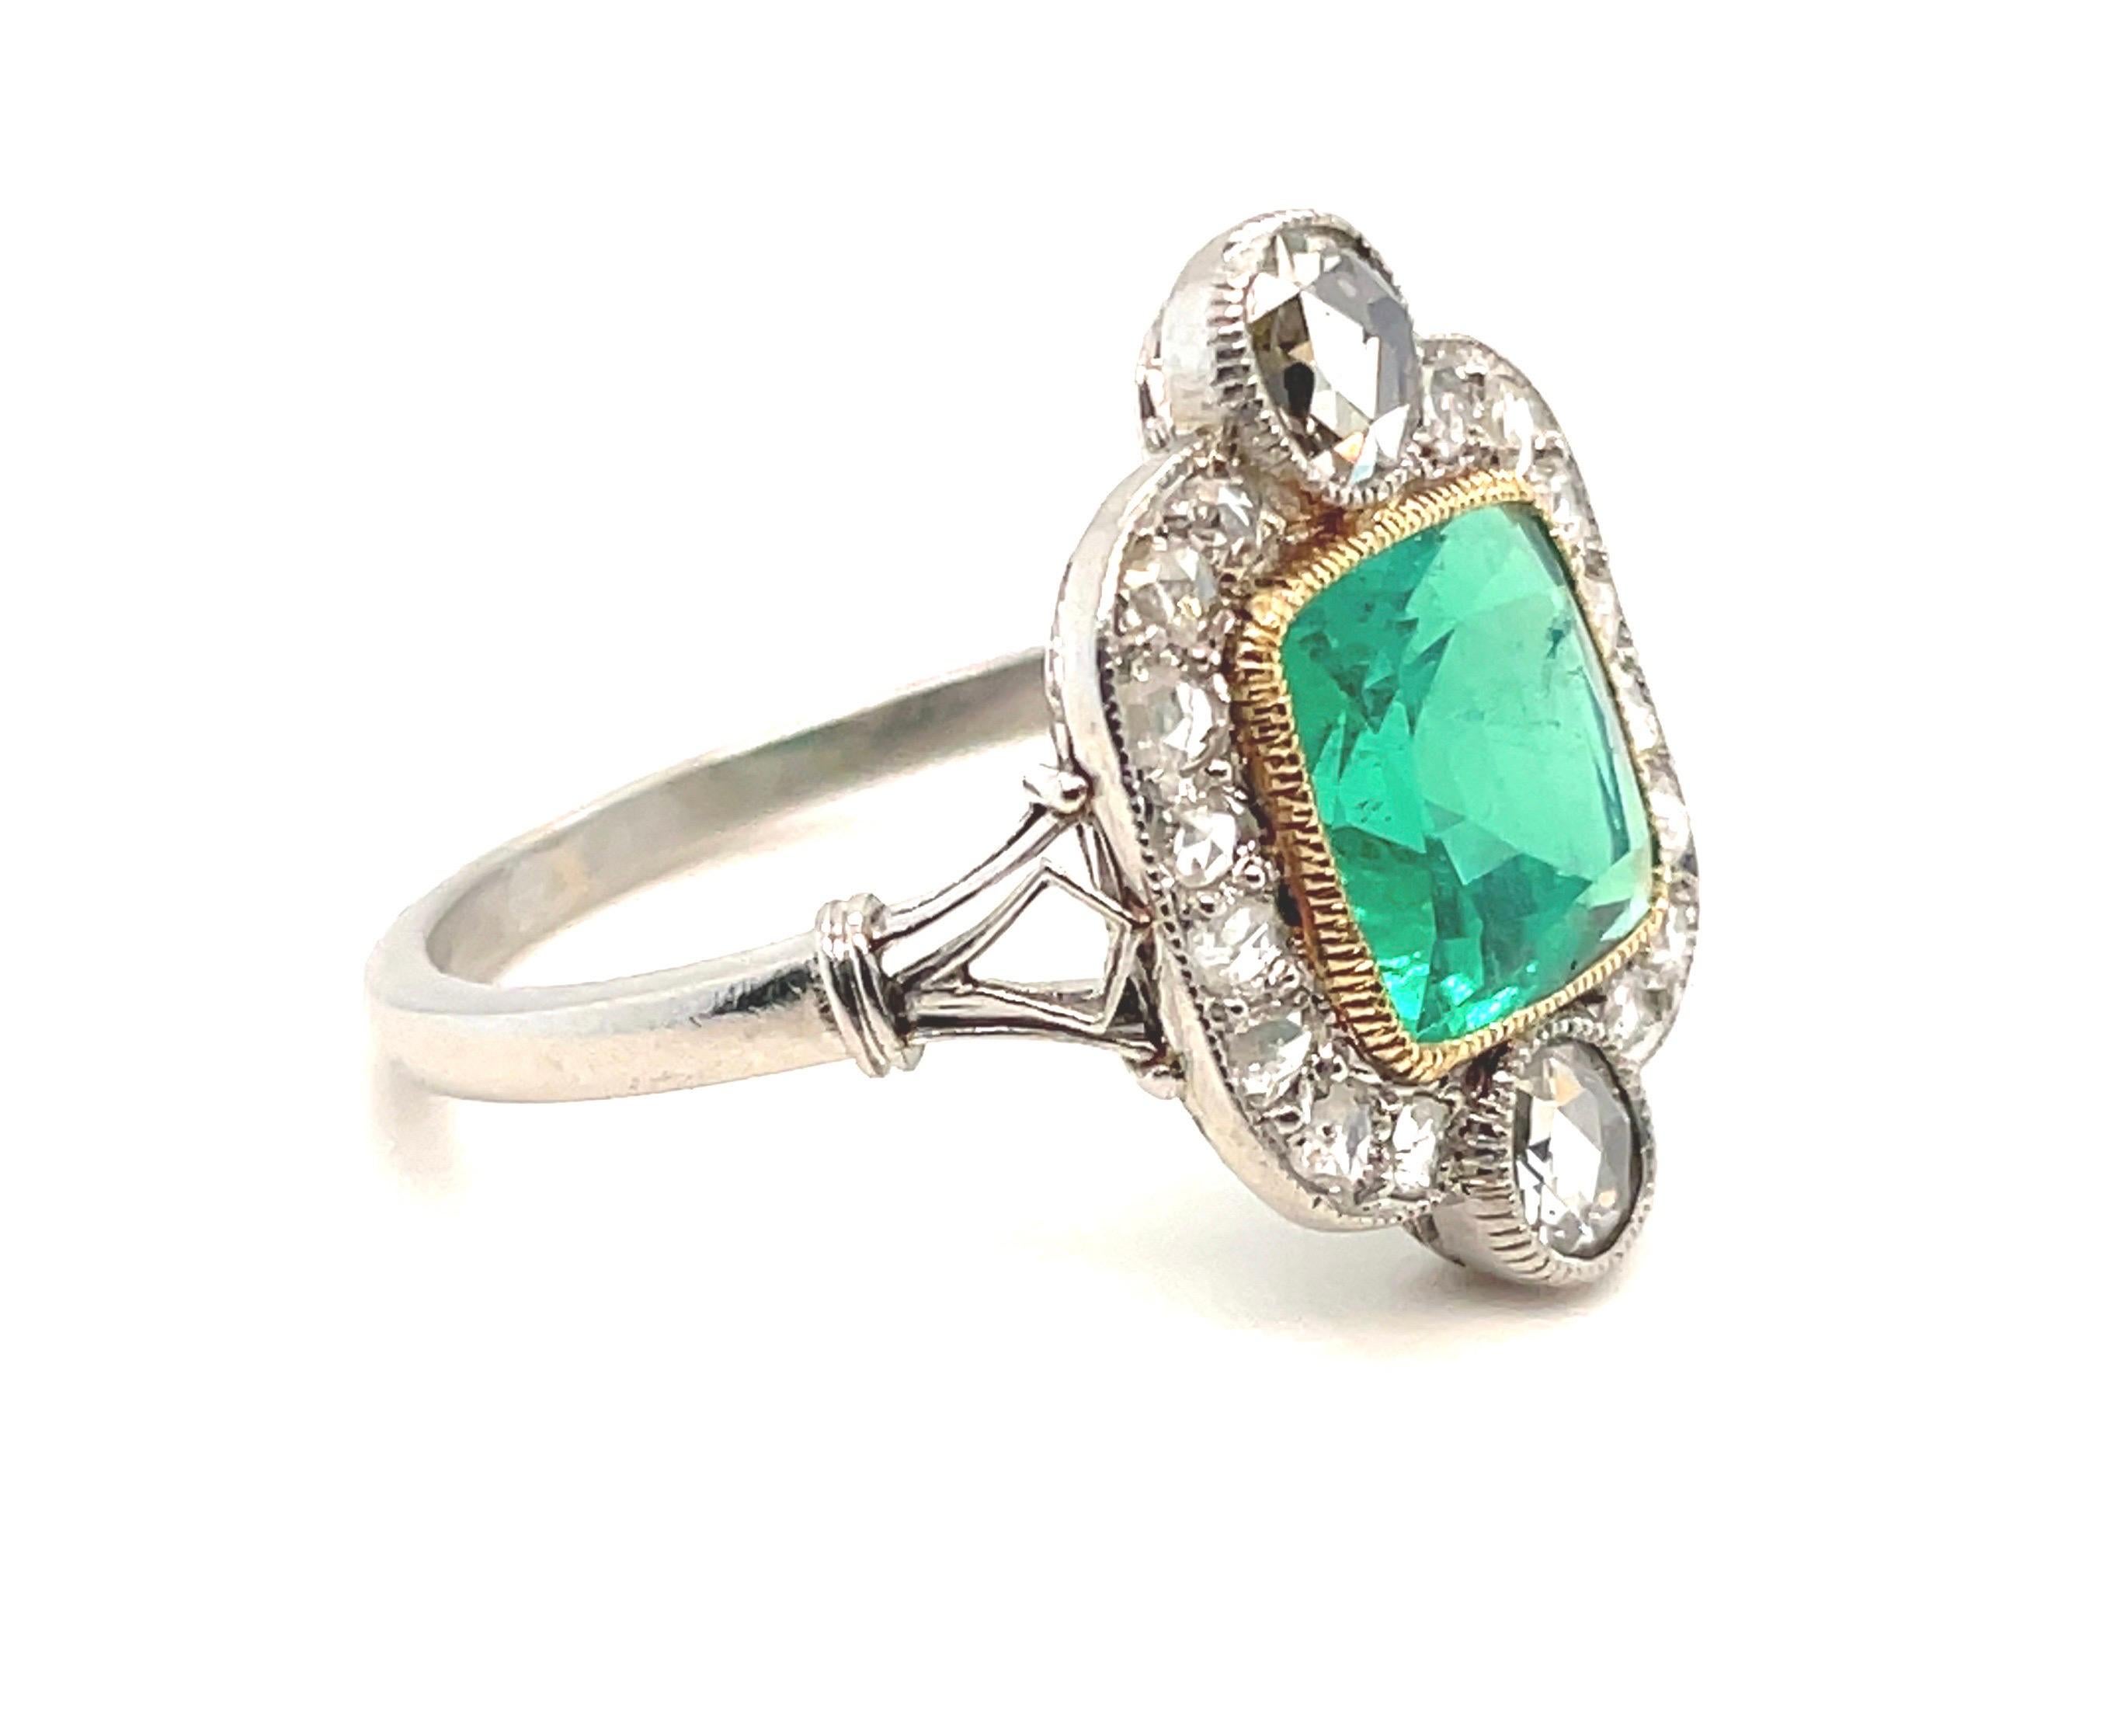 Elegant SSEF certified Art-Déco Colombian Emerald and Diamond Ring, dated circa 1920. 

Charming Art-Déco ring, set with a cushion-shaped, luminous Colombian emerald of 2.22 ct, minor enhancement, within a surround of 18 rose-cut diamonds in